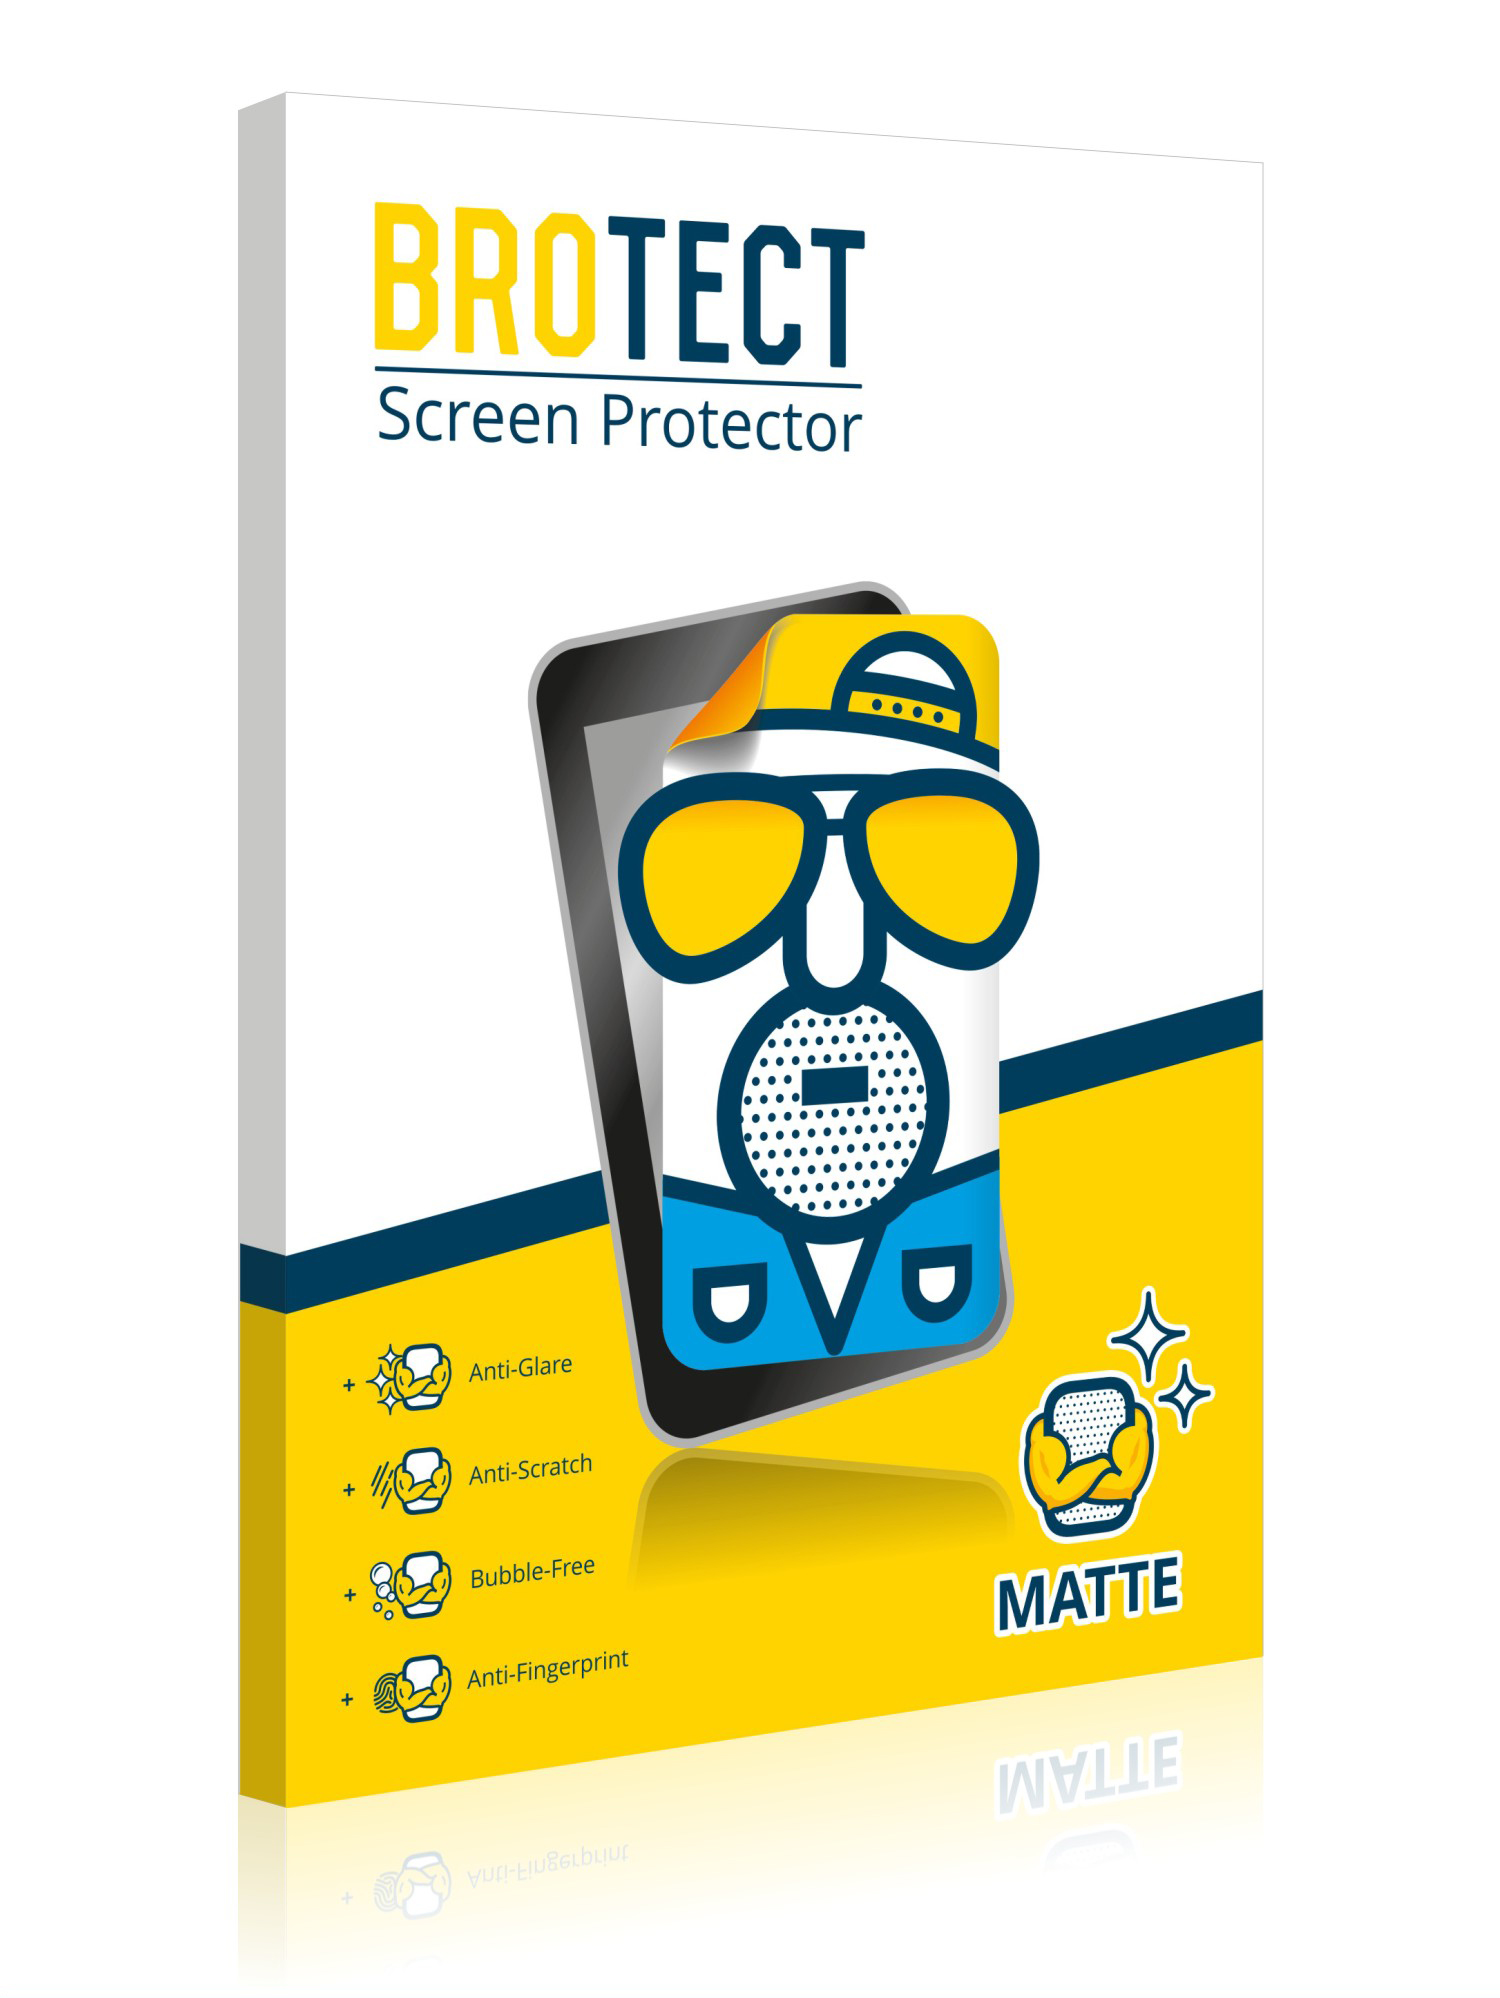 brotect 2-Pack Screen Protector Anti-Glare compatible with Porsche 718 Cayman 2010-2018 PCM 4.0 Screen Protector Matte Anti-Fingerprint Protection